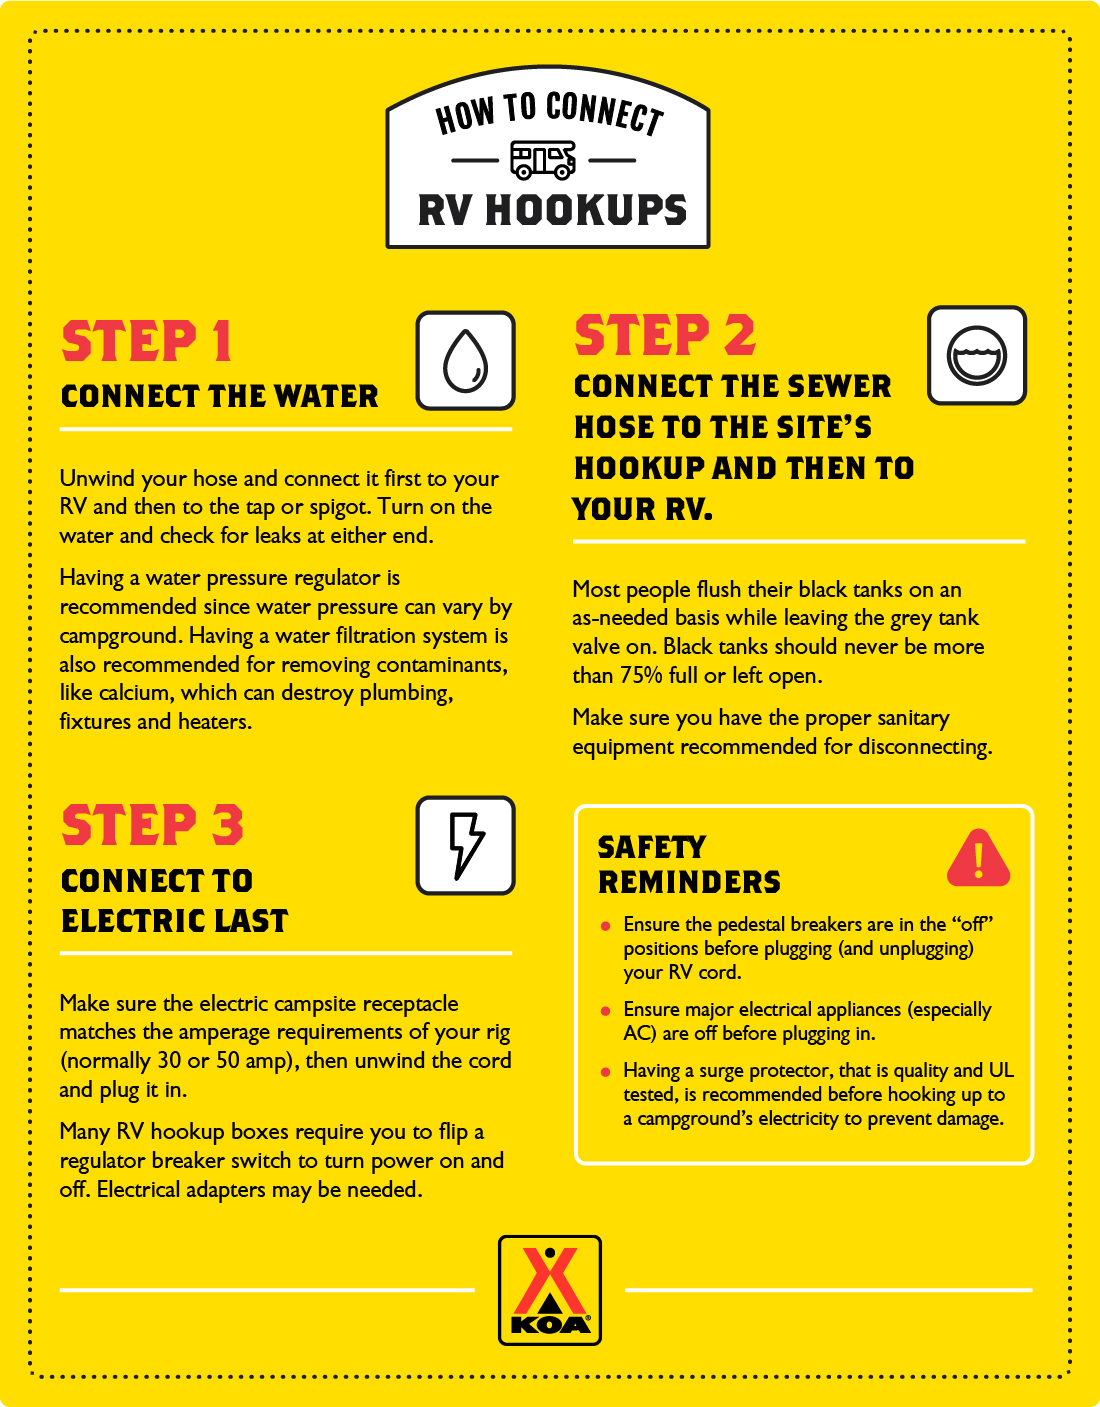 How To Connect RV Hookups